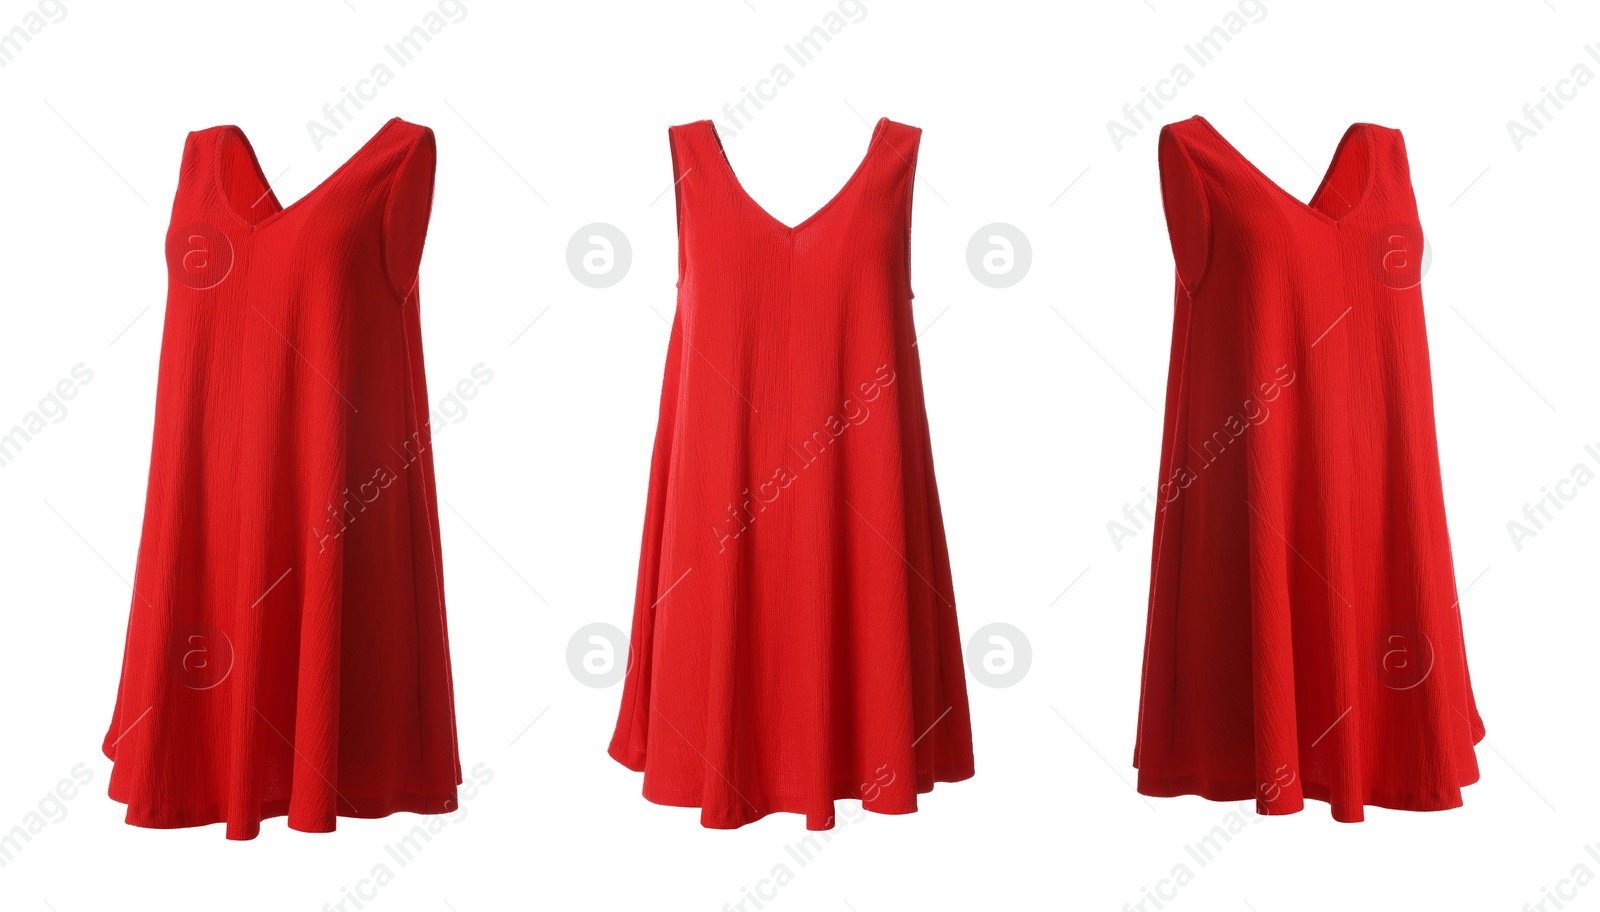 Image of Set of beautiful short red dresses from different views on white background